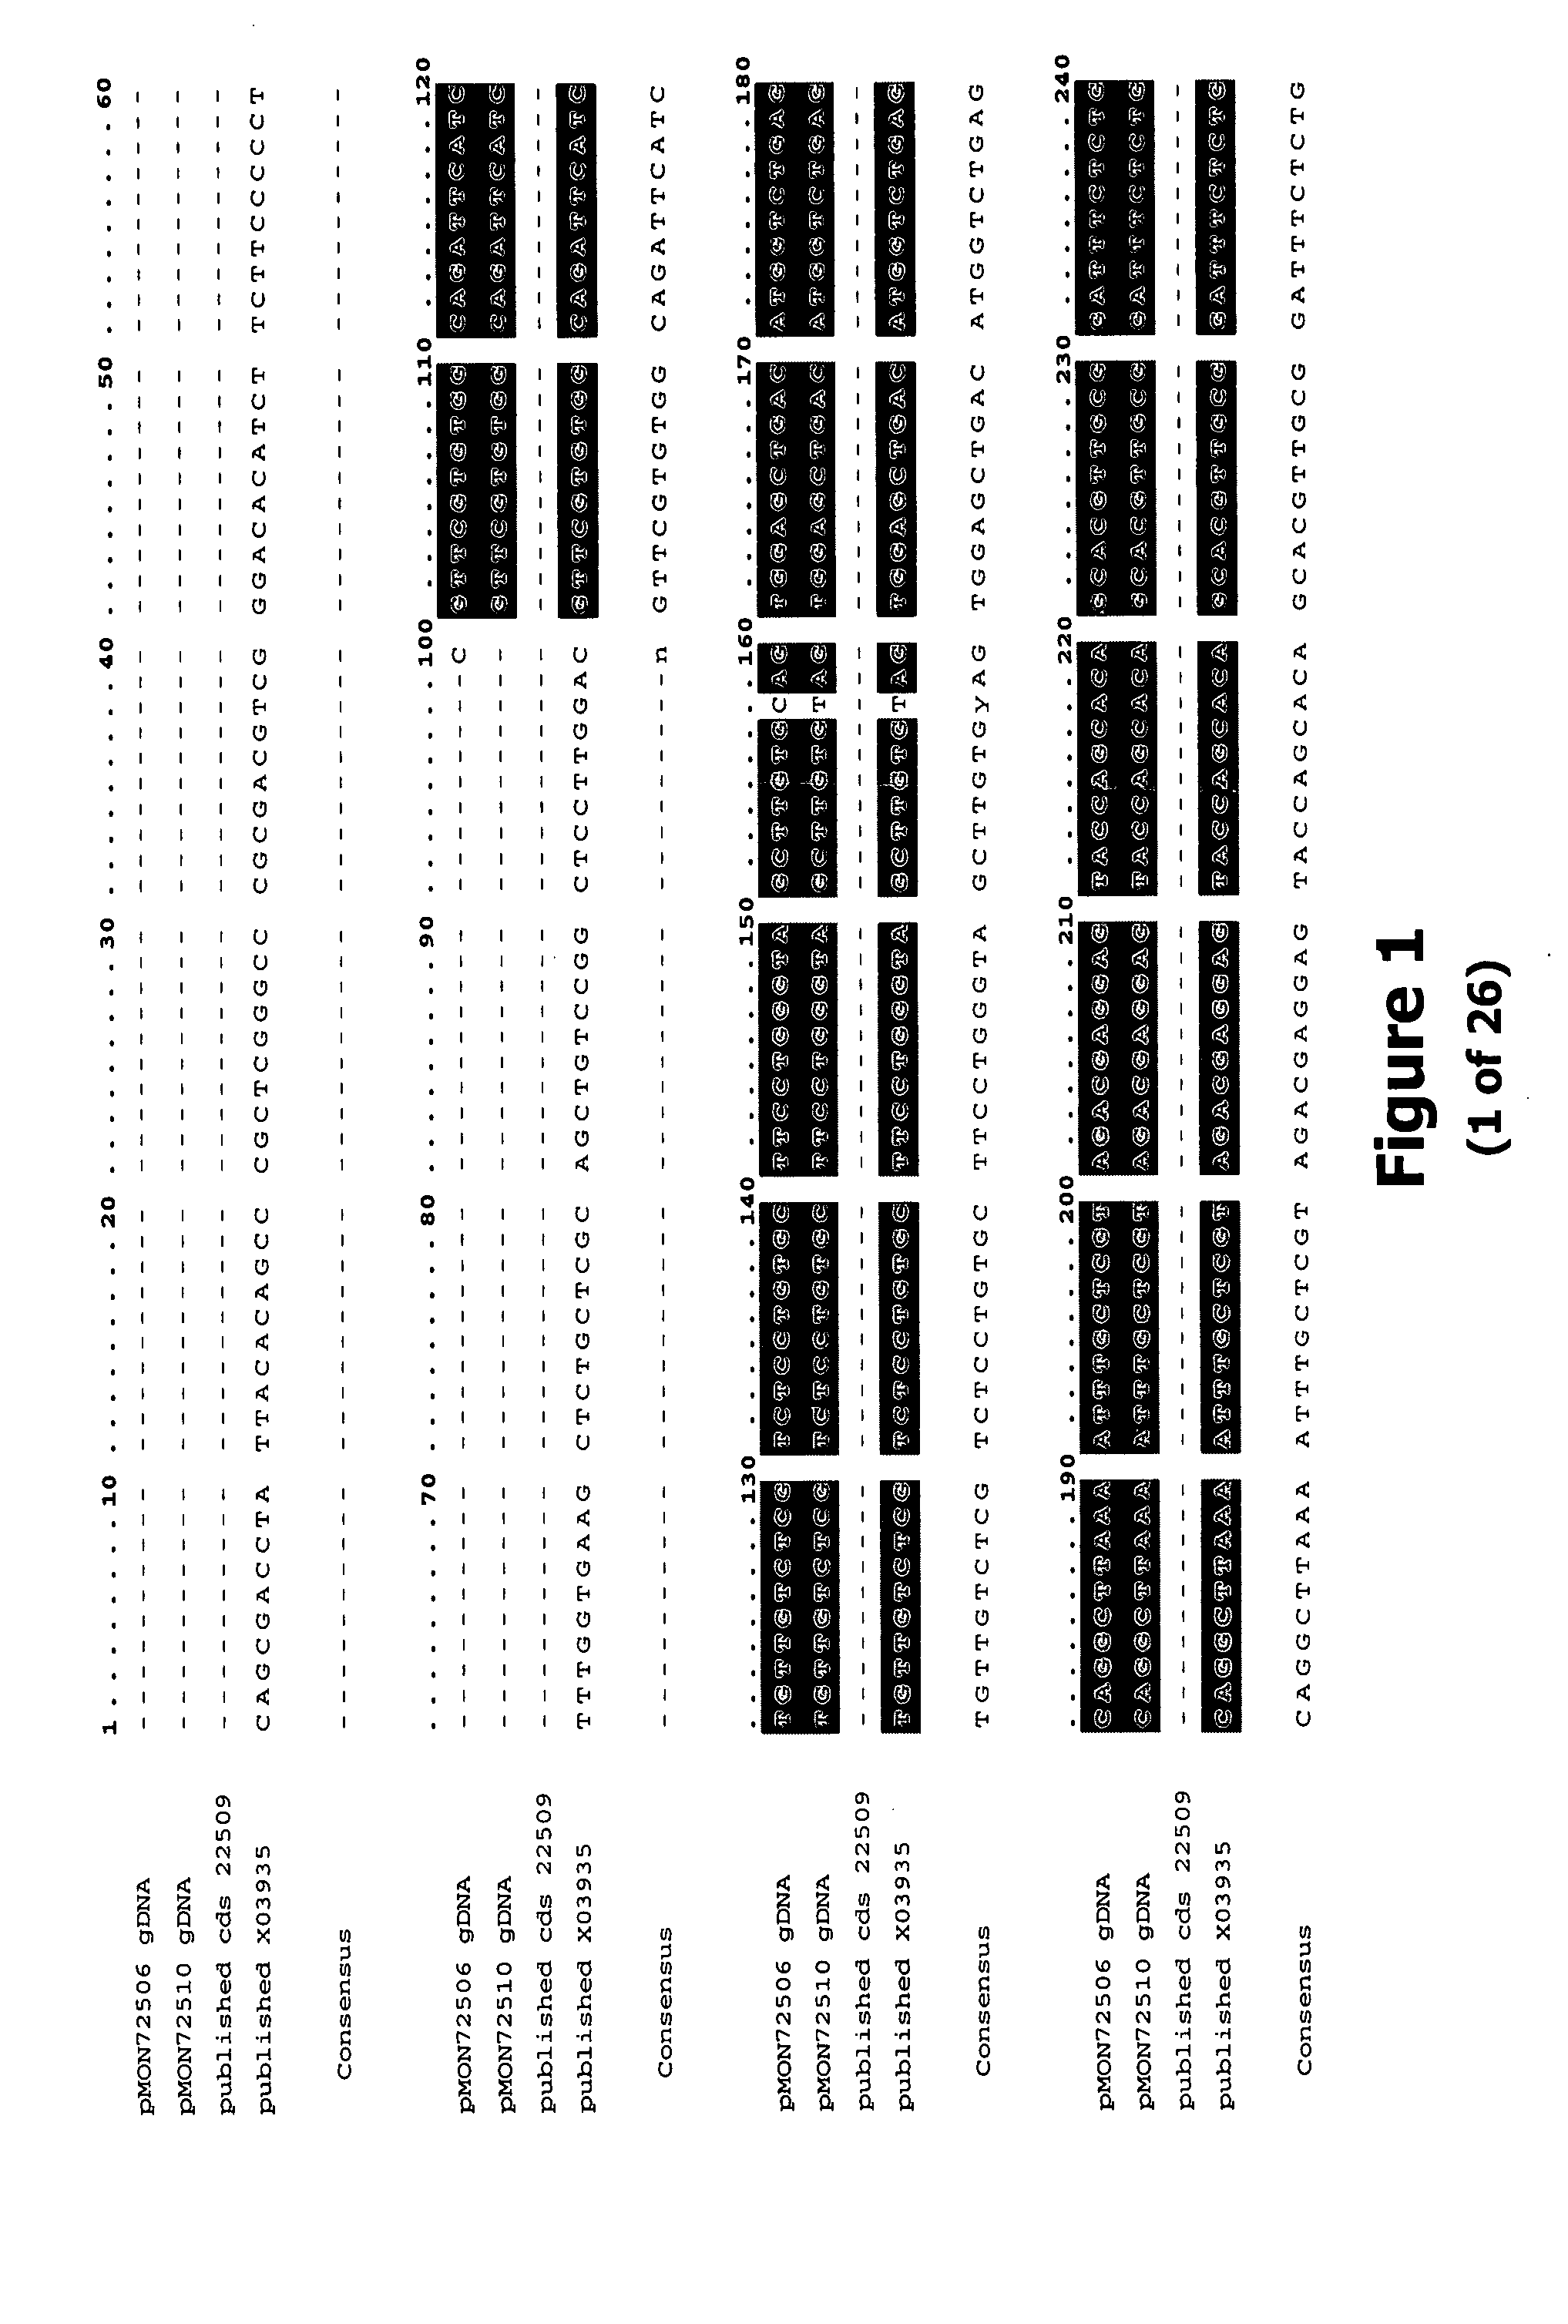 Elevation of oil levels in plants